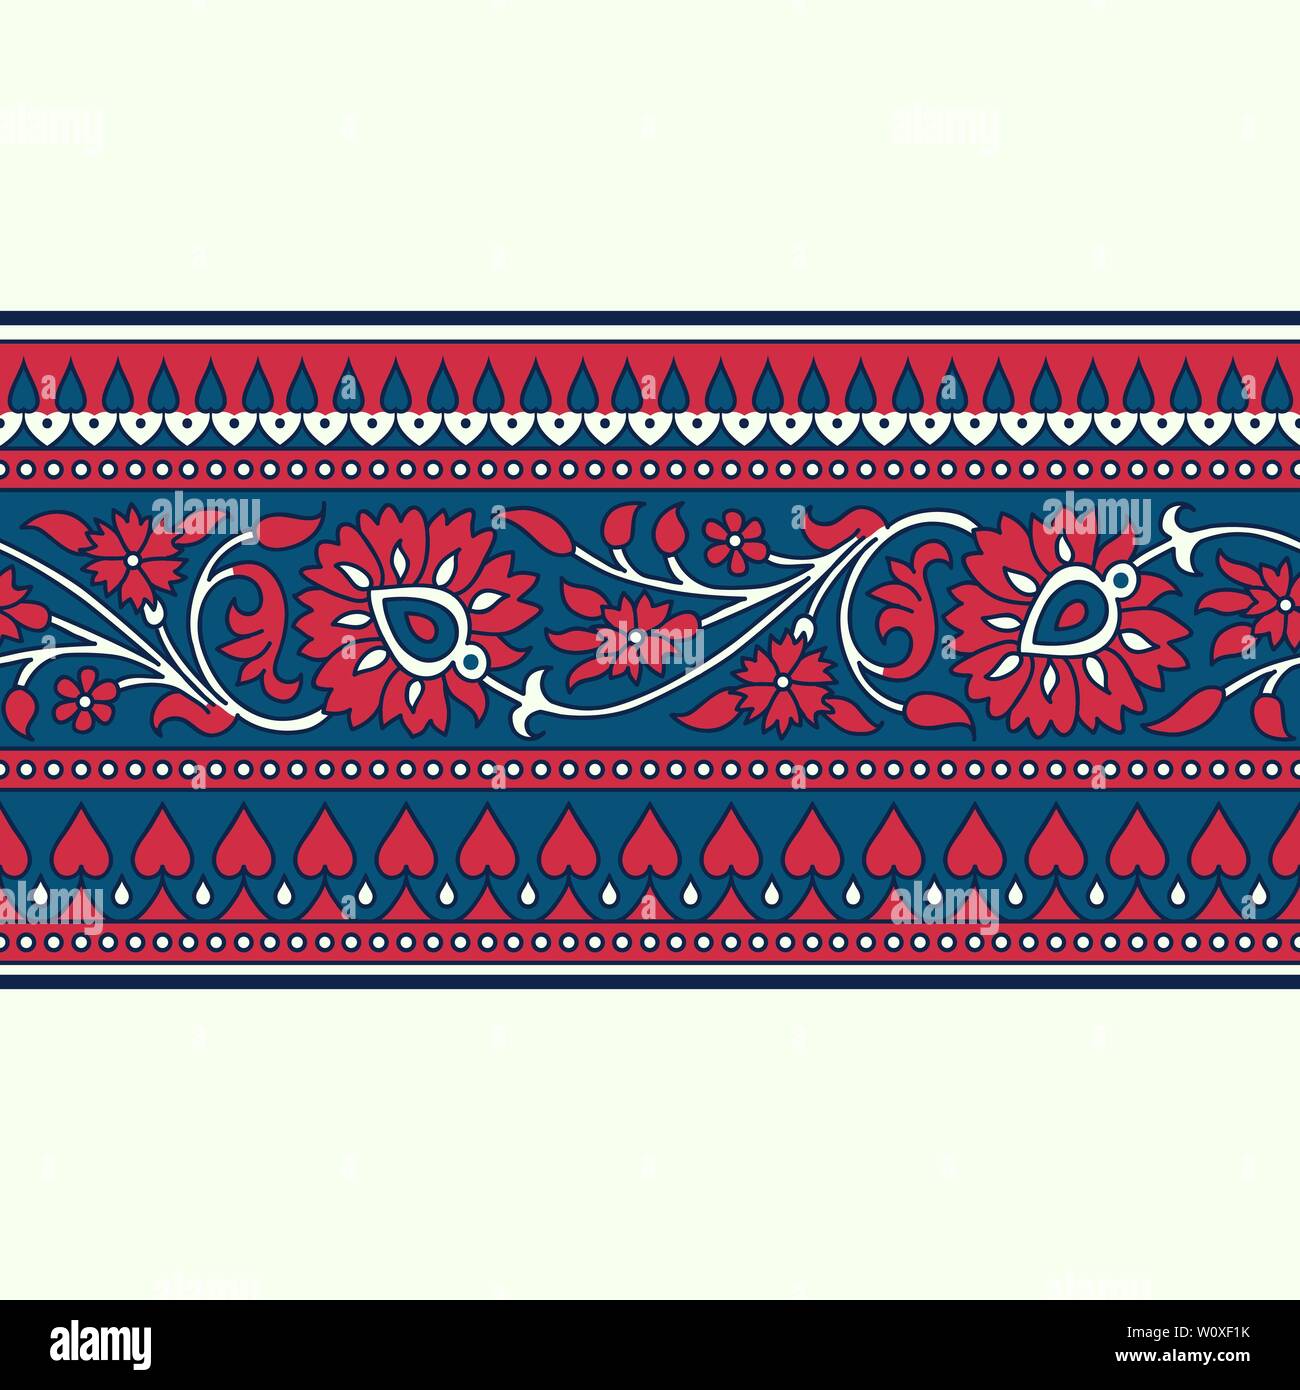 Woodblock printed indigo dye seamless ethnic floral border. Traditional oriental ornament of India, meander motif with flowers, red and blue on ecru. Stock Vector